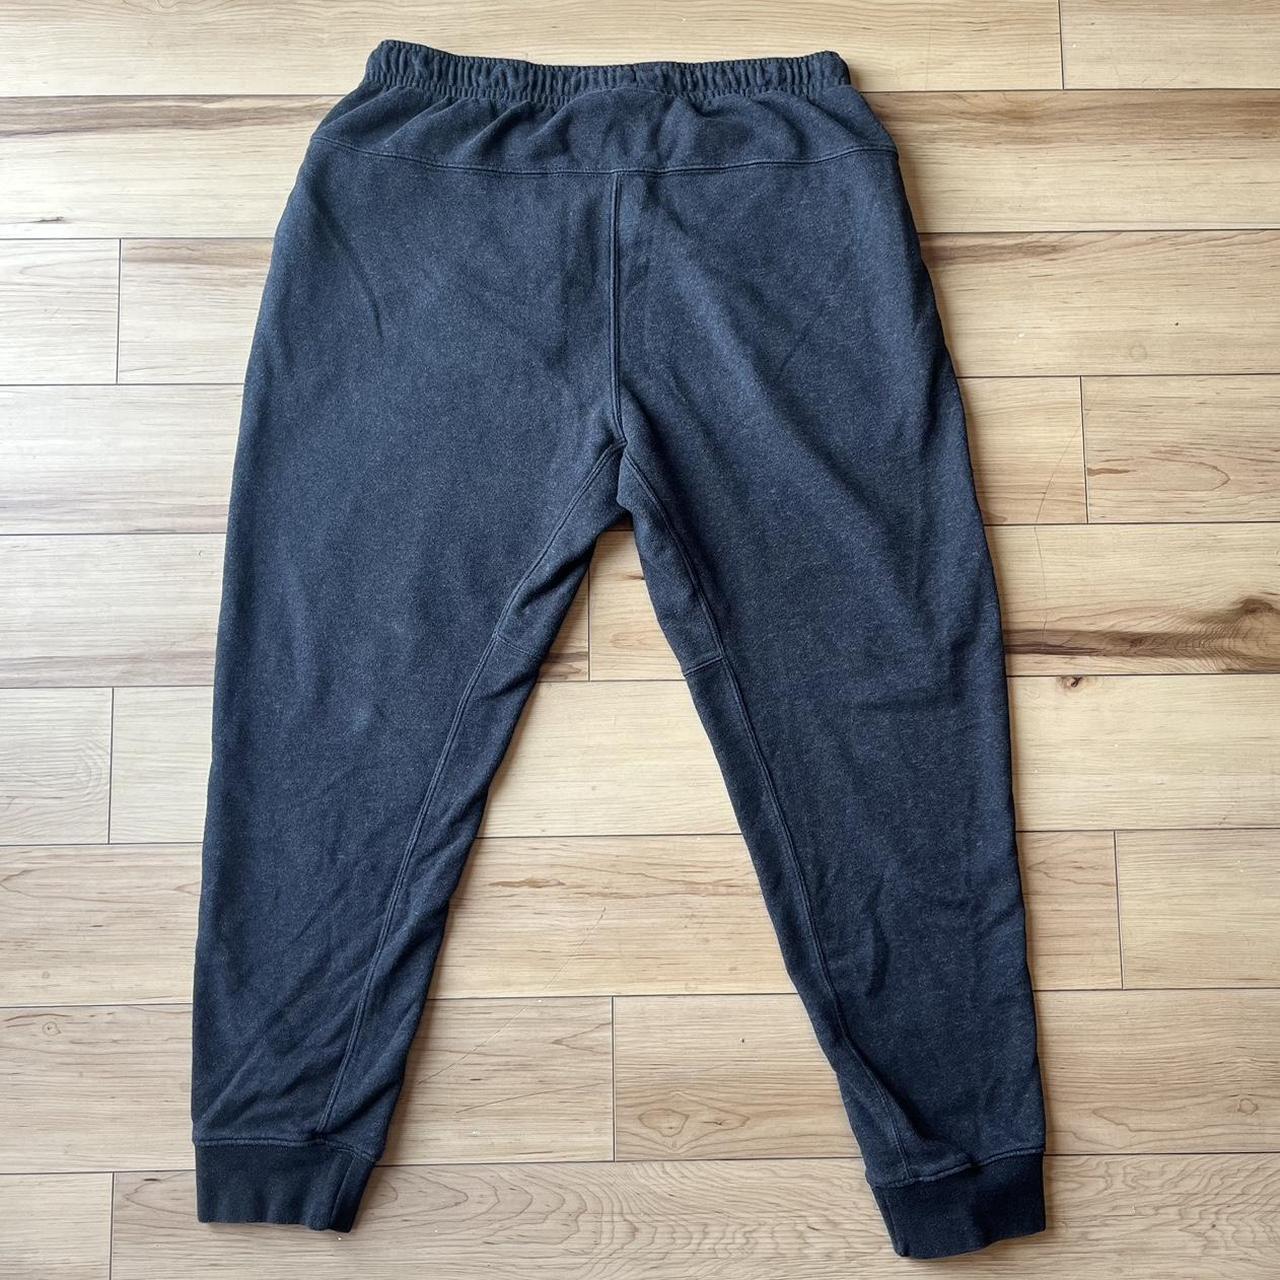 Vintage Nike sweats, Size XL but more like L, Very